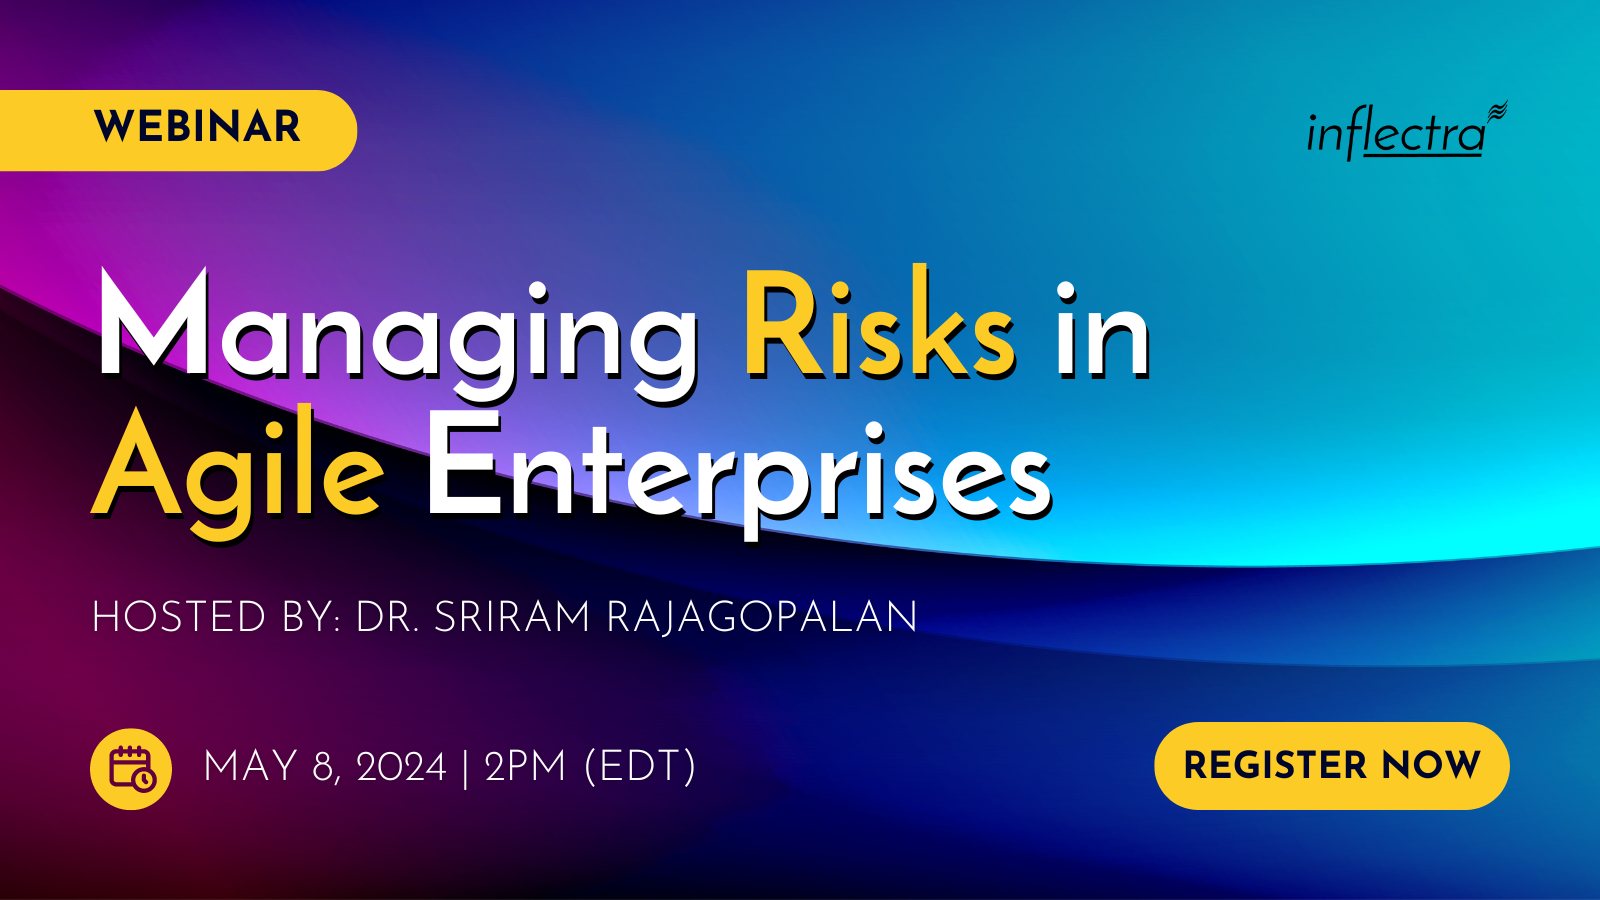 A banner advertising a free webinar titled “Managing Risks in Agile Enterprises” hosted by Dr. Sriram Rajagopalan on May 8, 2024 at 2:00 pm EDT. Black Inflectra logo in top right corner.